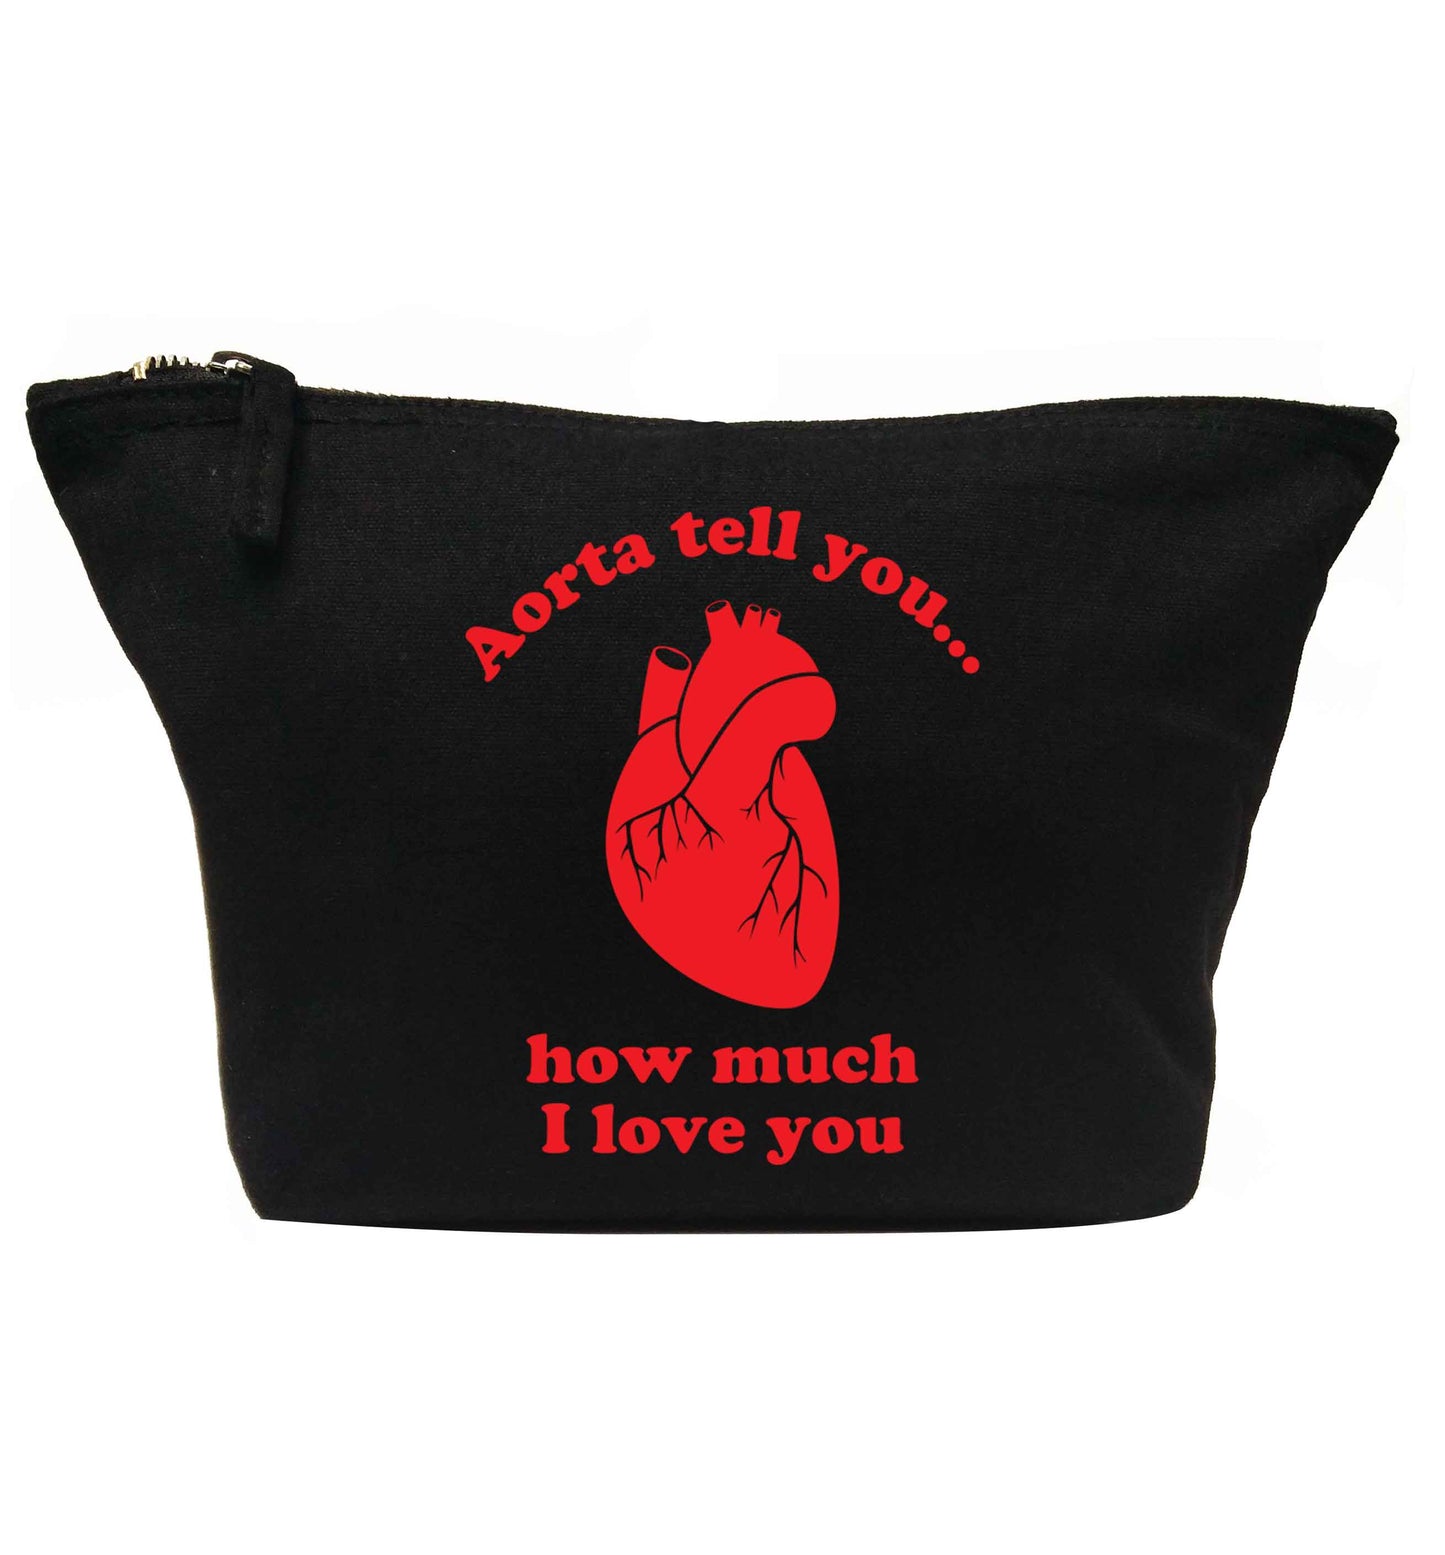 Aorta tell you how much I love you | Makeup / wash bag